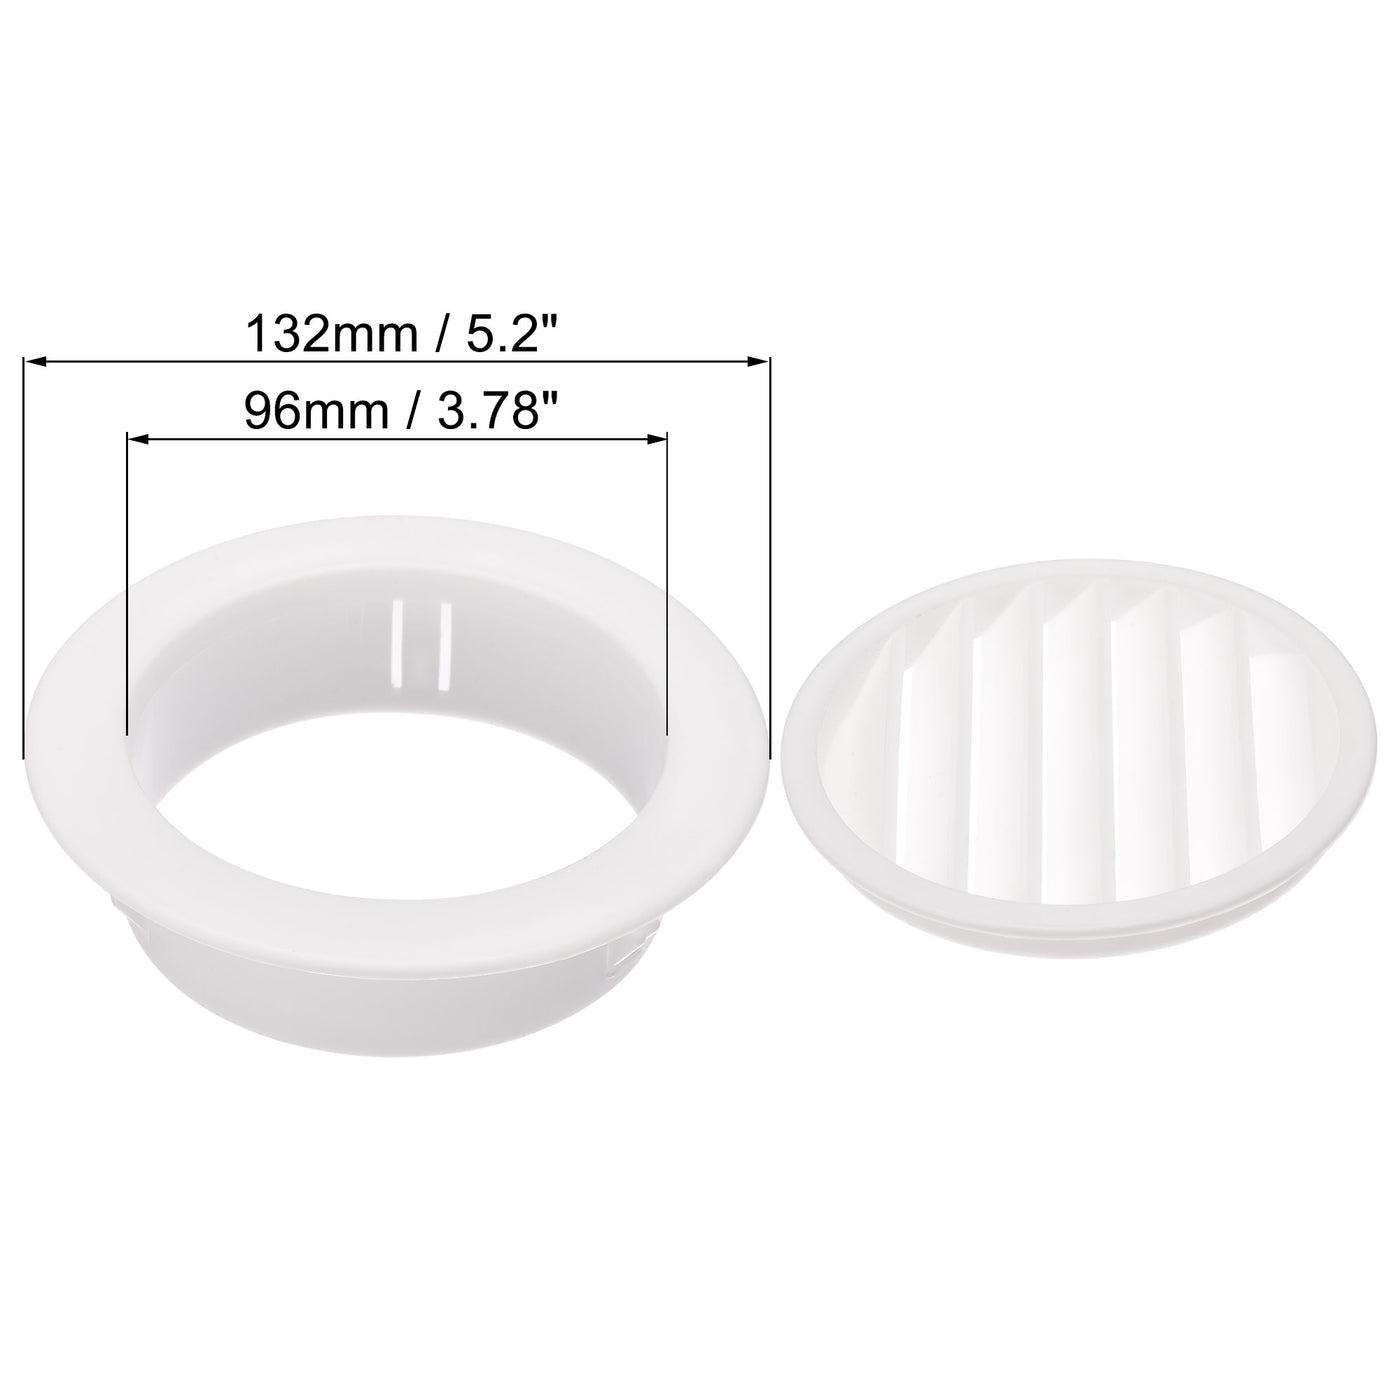 uxcell Uxcell Round Vent Cover, PP Plastic Detachable Air Vent Exhaust Louver for 4" - 4.3" Diameter Hole 2pcs